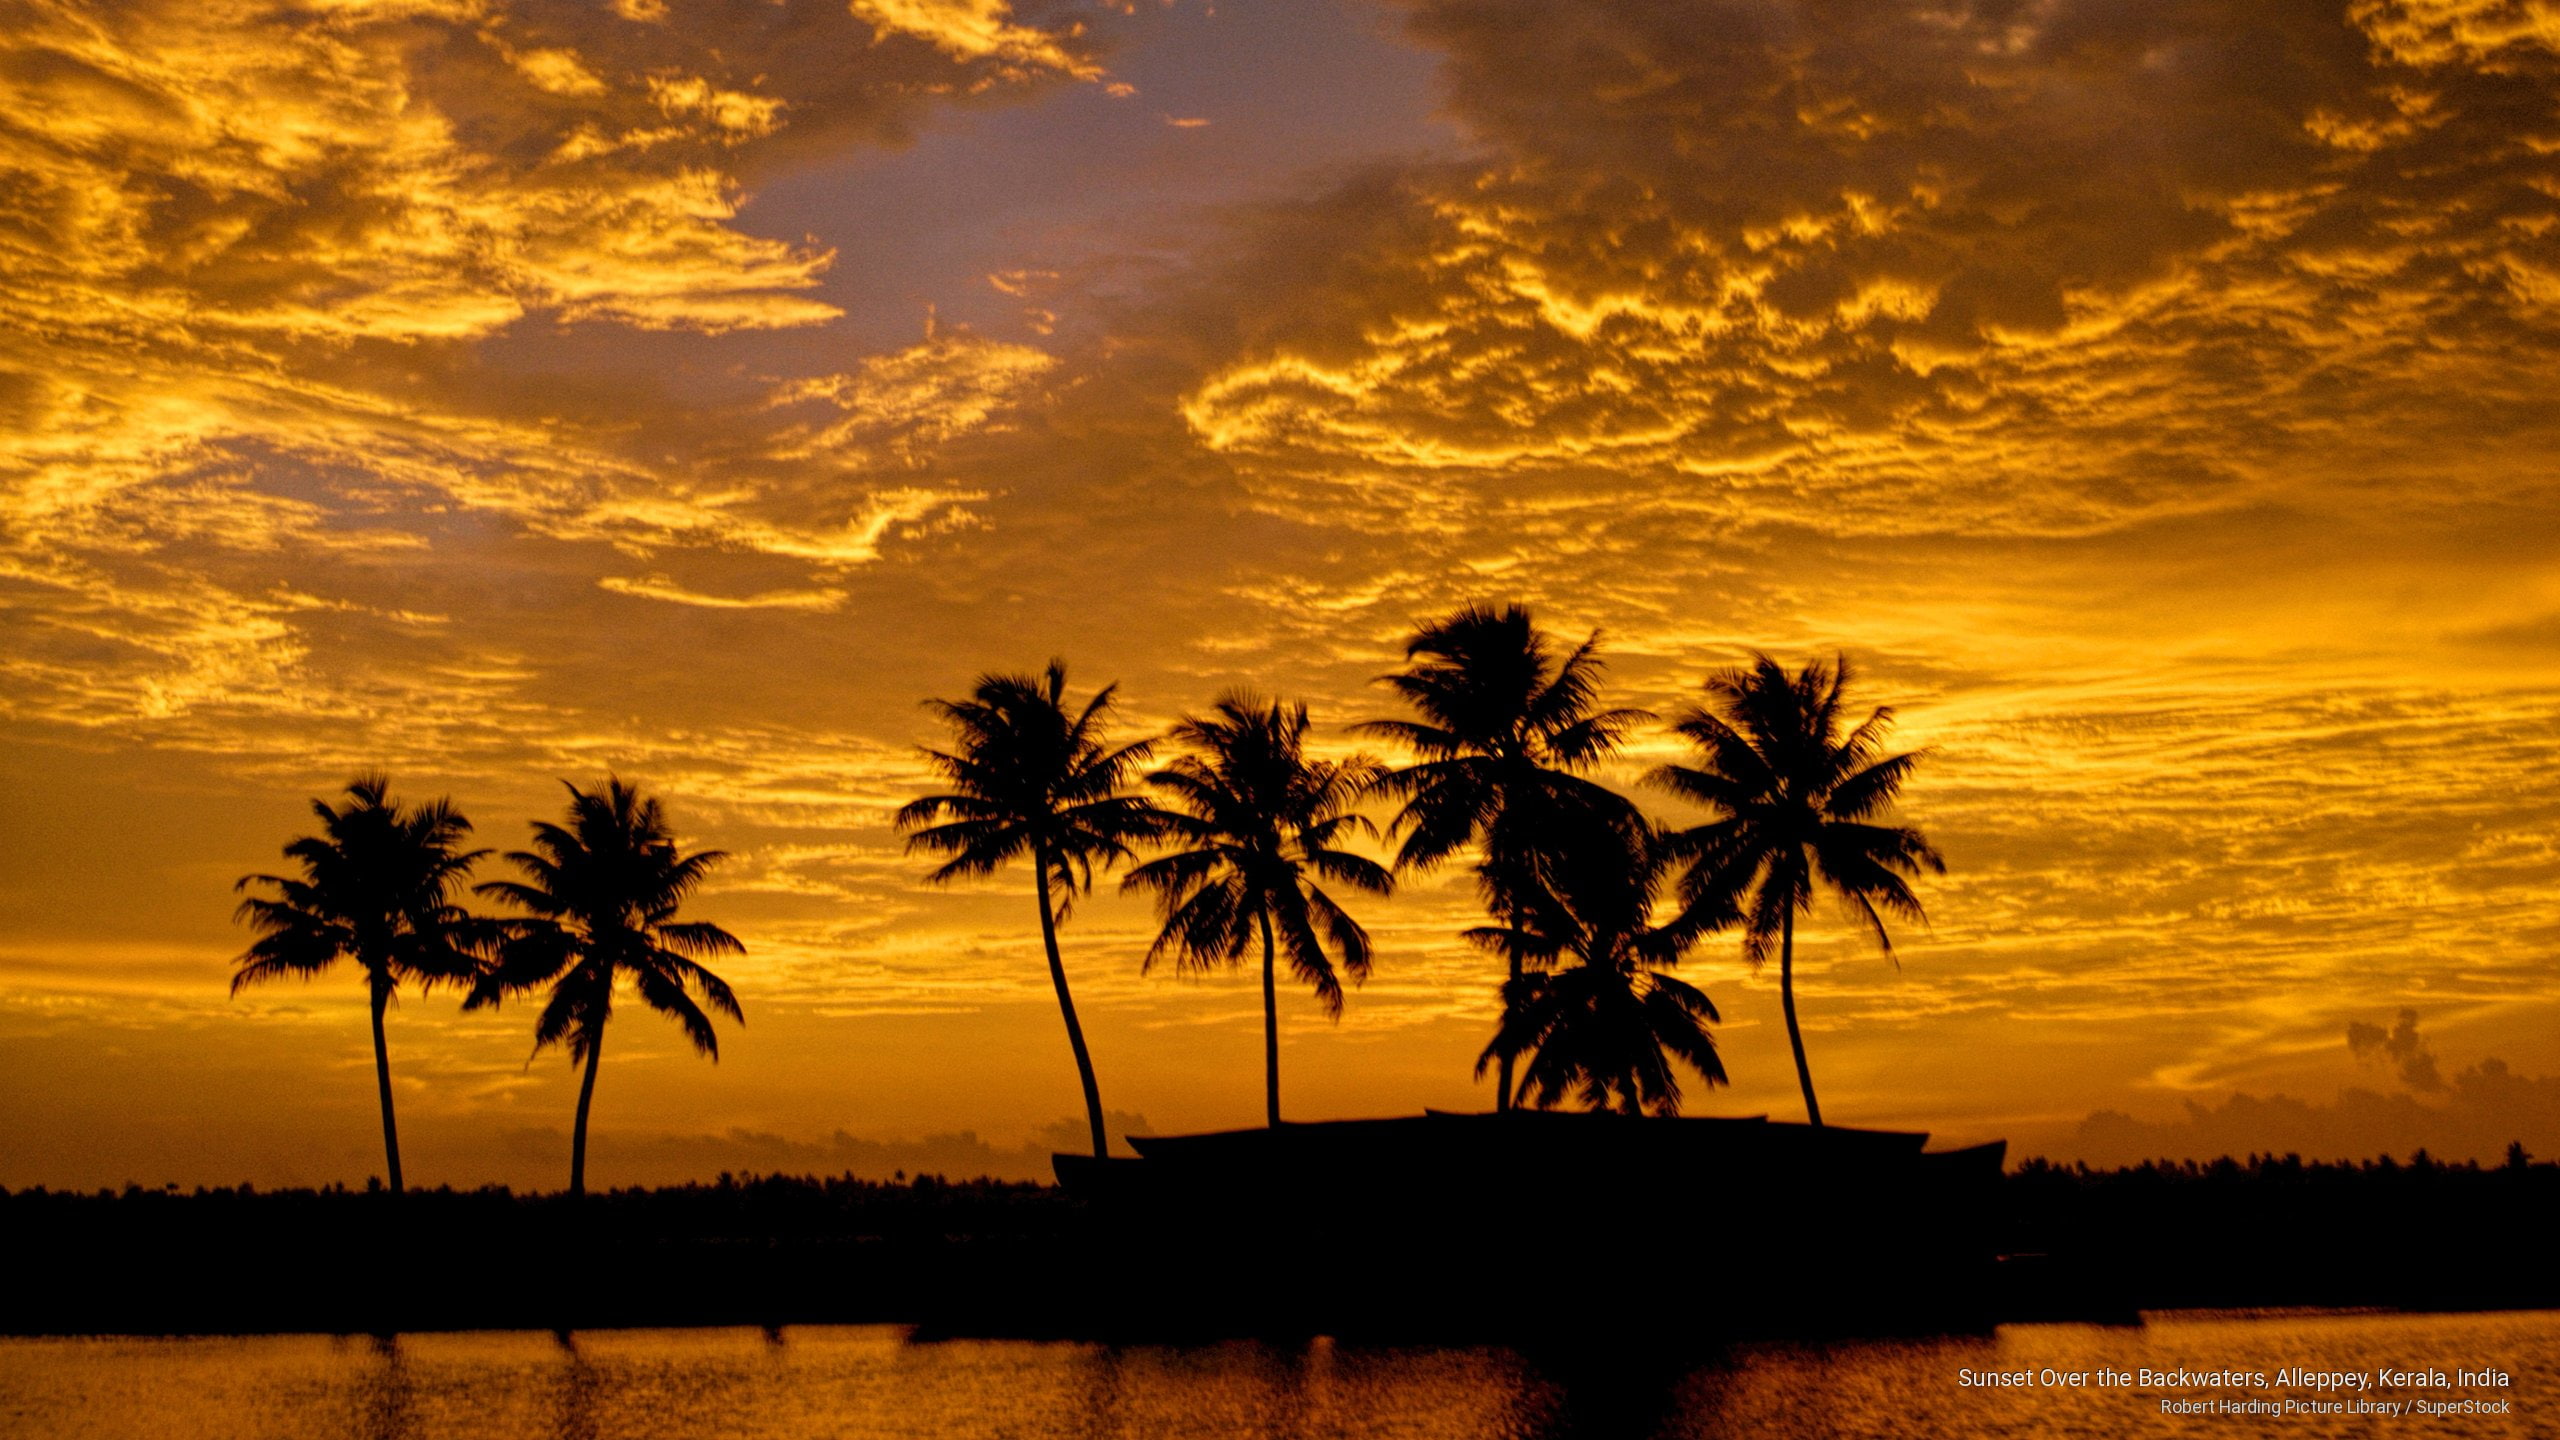 Sunset Over the Backwaters, Alleppey, Kerala, India, Sunrises/Sunsets